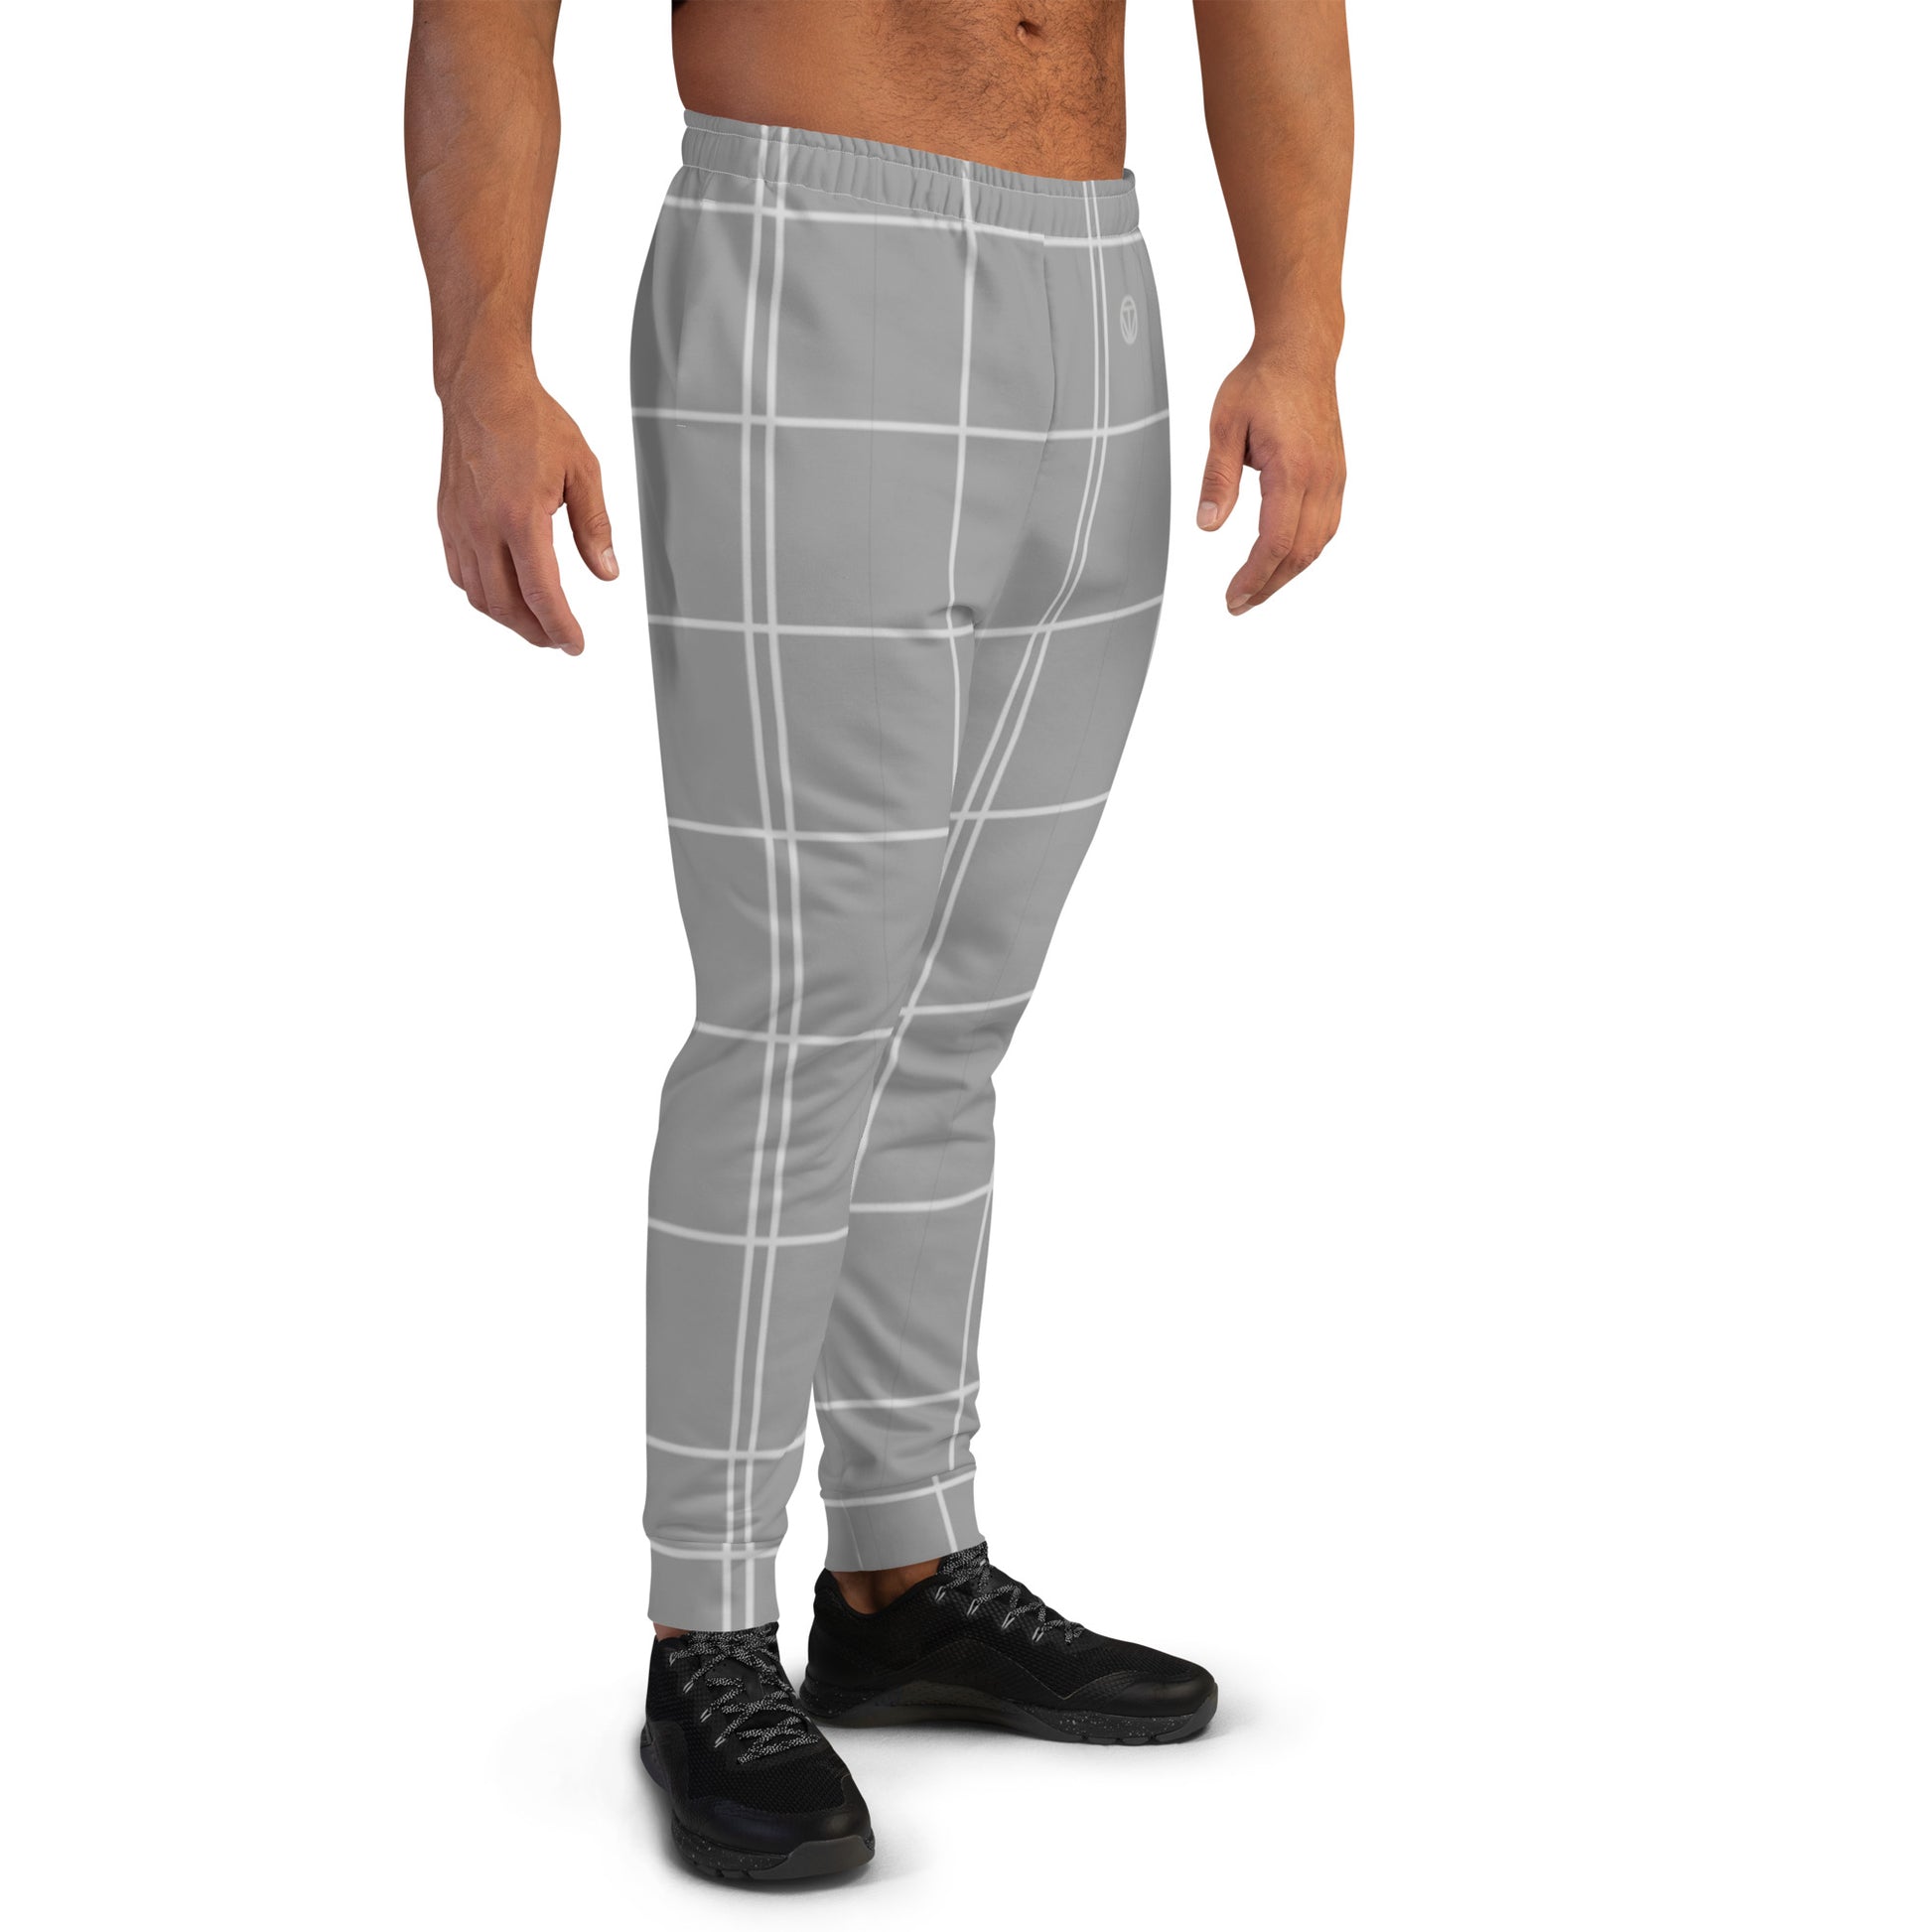 TIME OF VIBES - Men's Joggers LINEUP (Grey) - €69.00